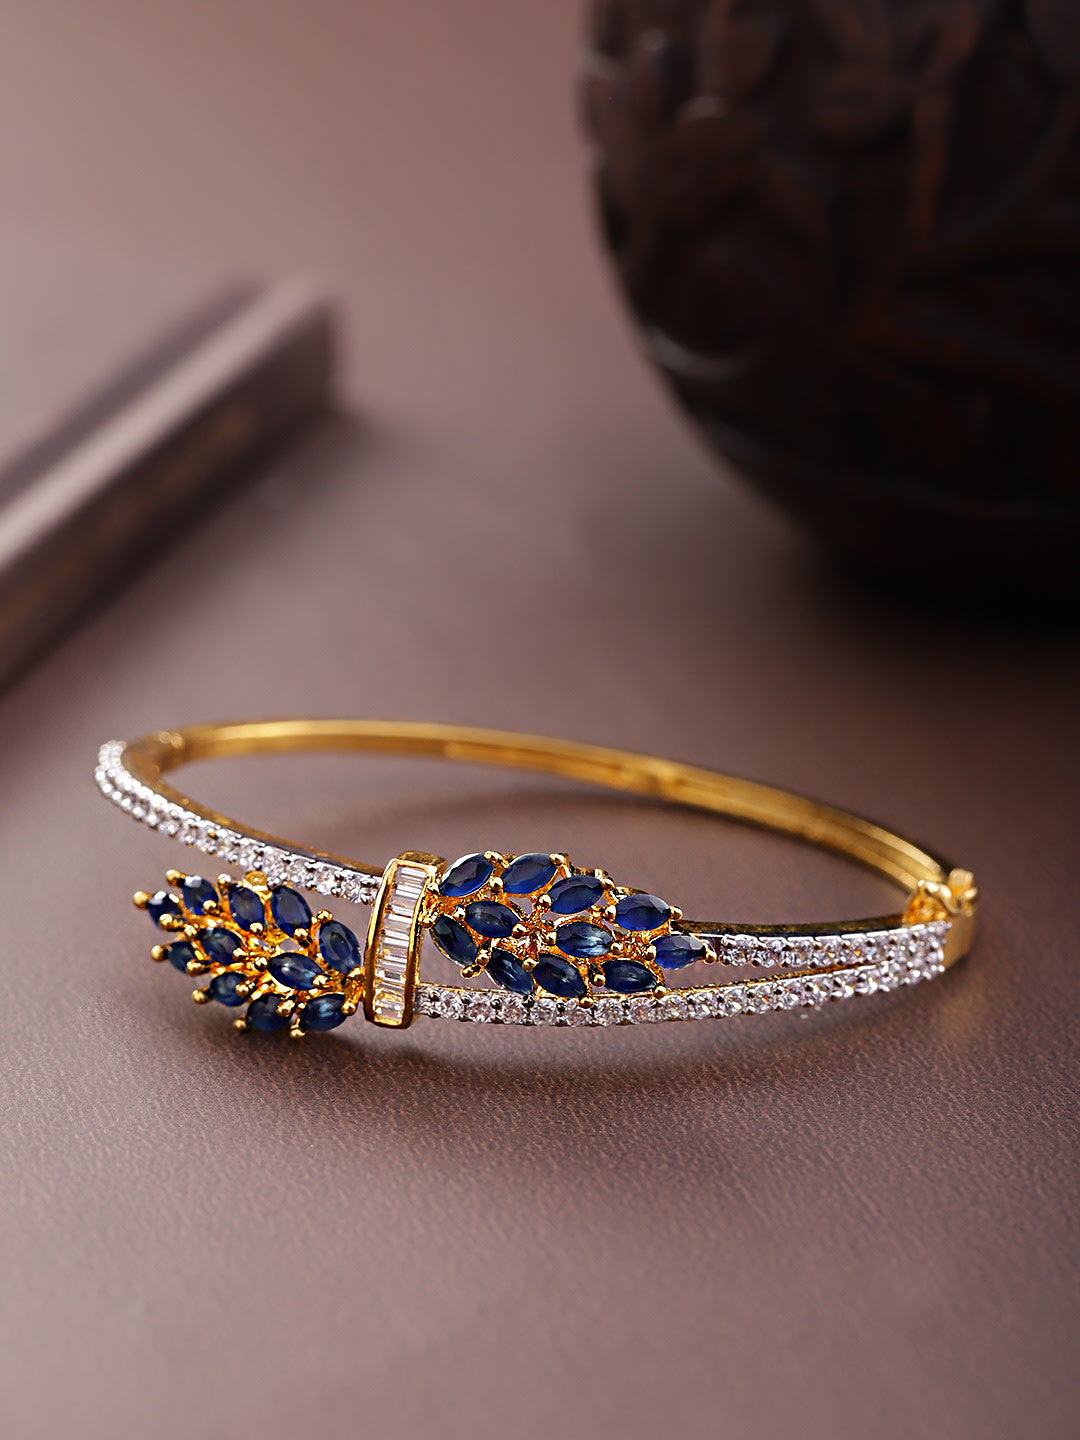 Gold-Plated American Diamond Studded, Floral Patterned Bracelet in Blue Color